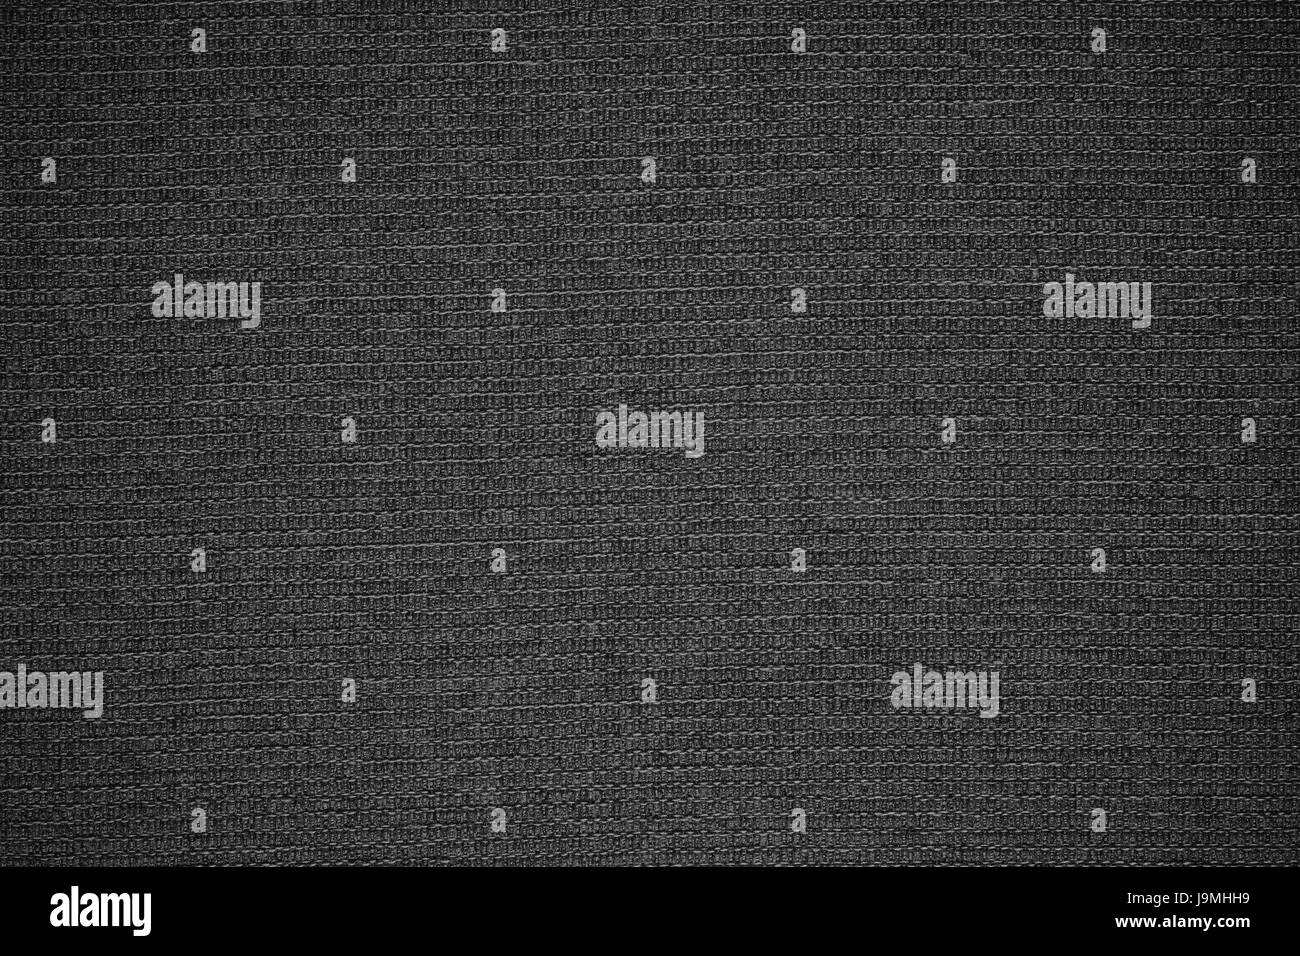 pattern, cotton, fabric, textured, cloth, backdrop, background, grey ...